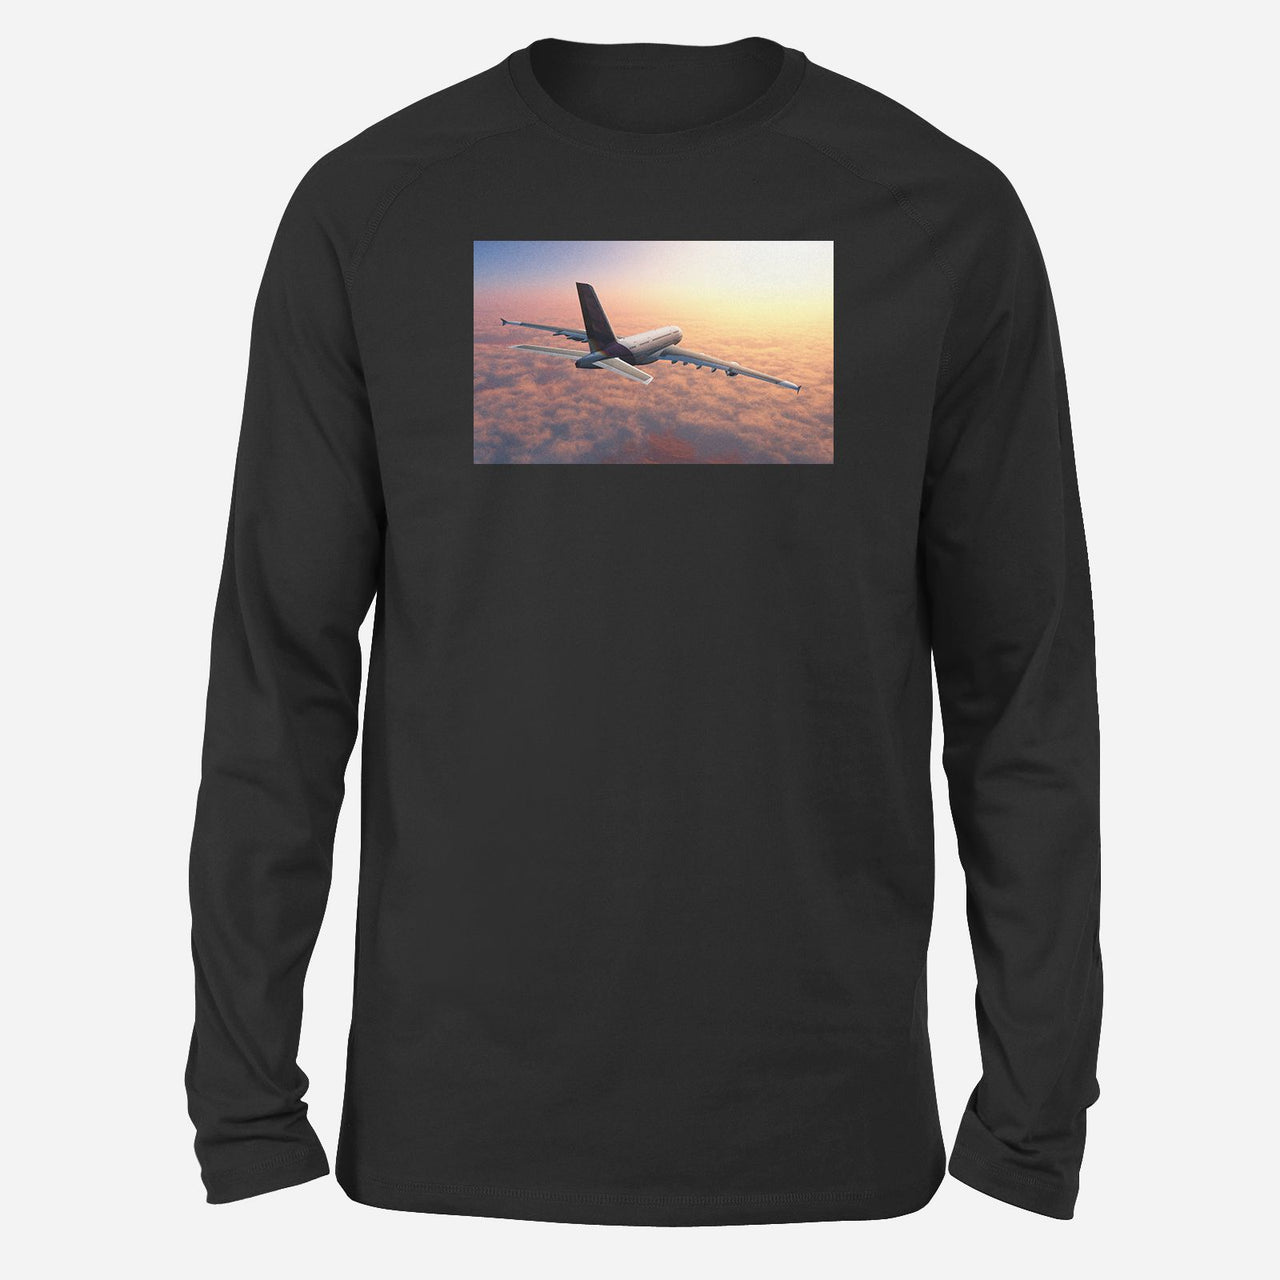 Super Cruising Airbus A380 over Clouds Designed Long-Sleeve T-Shirts